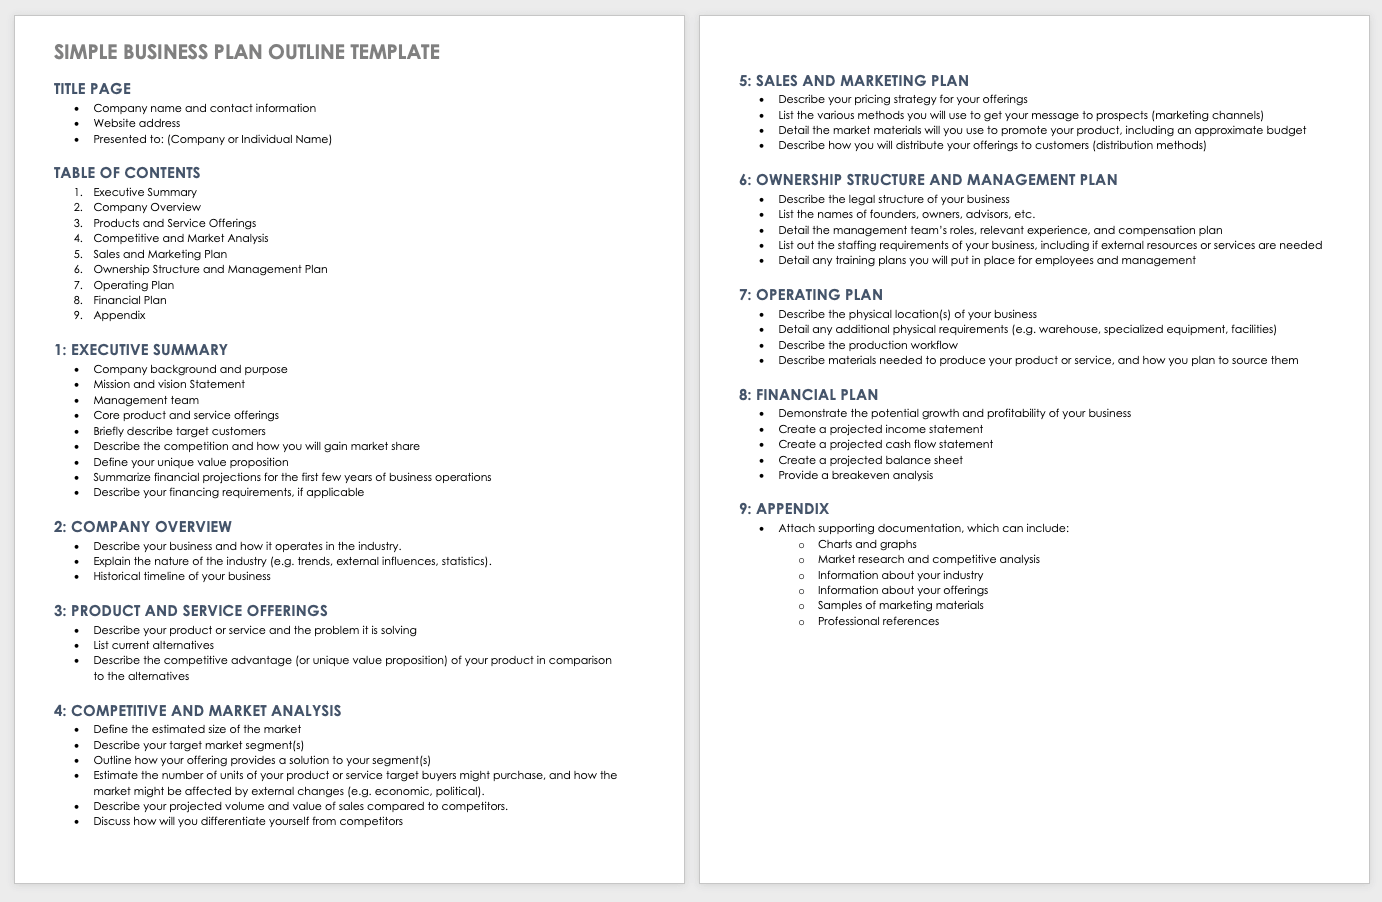 student business plans